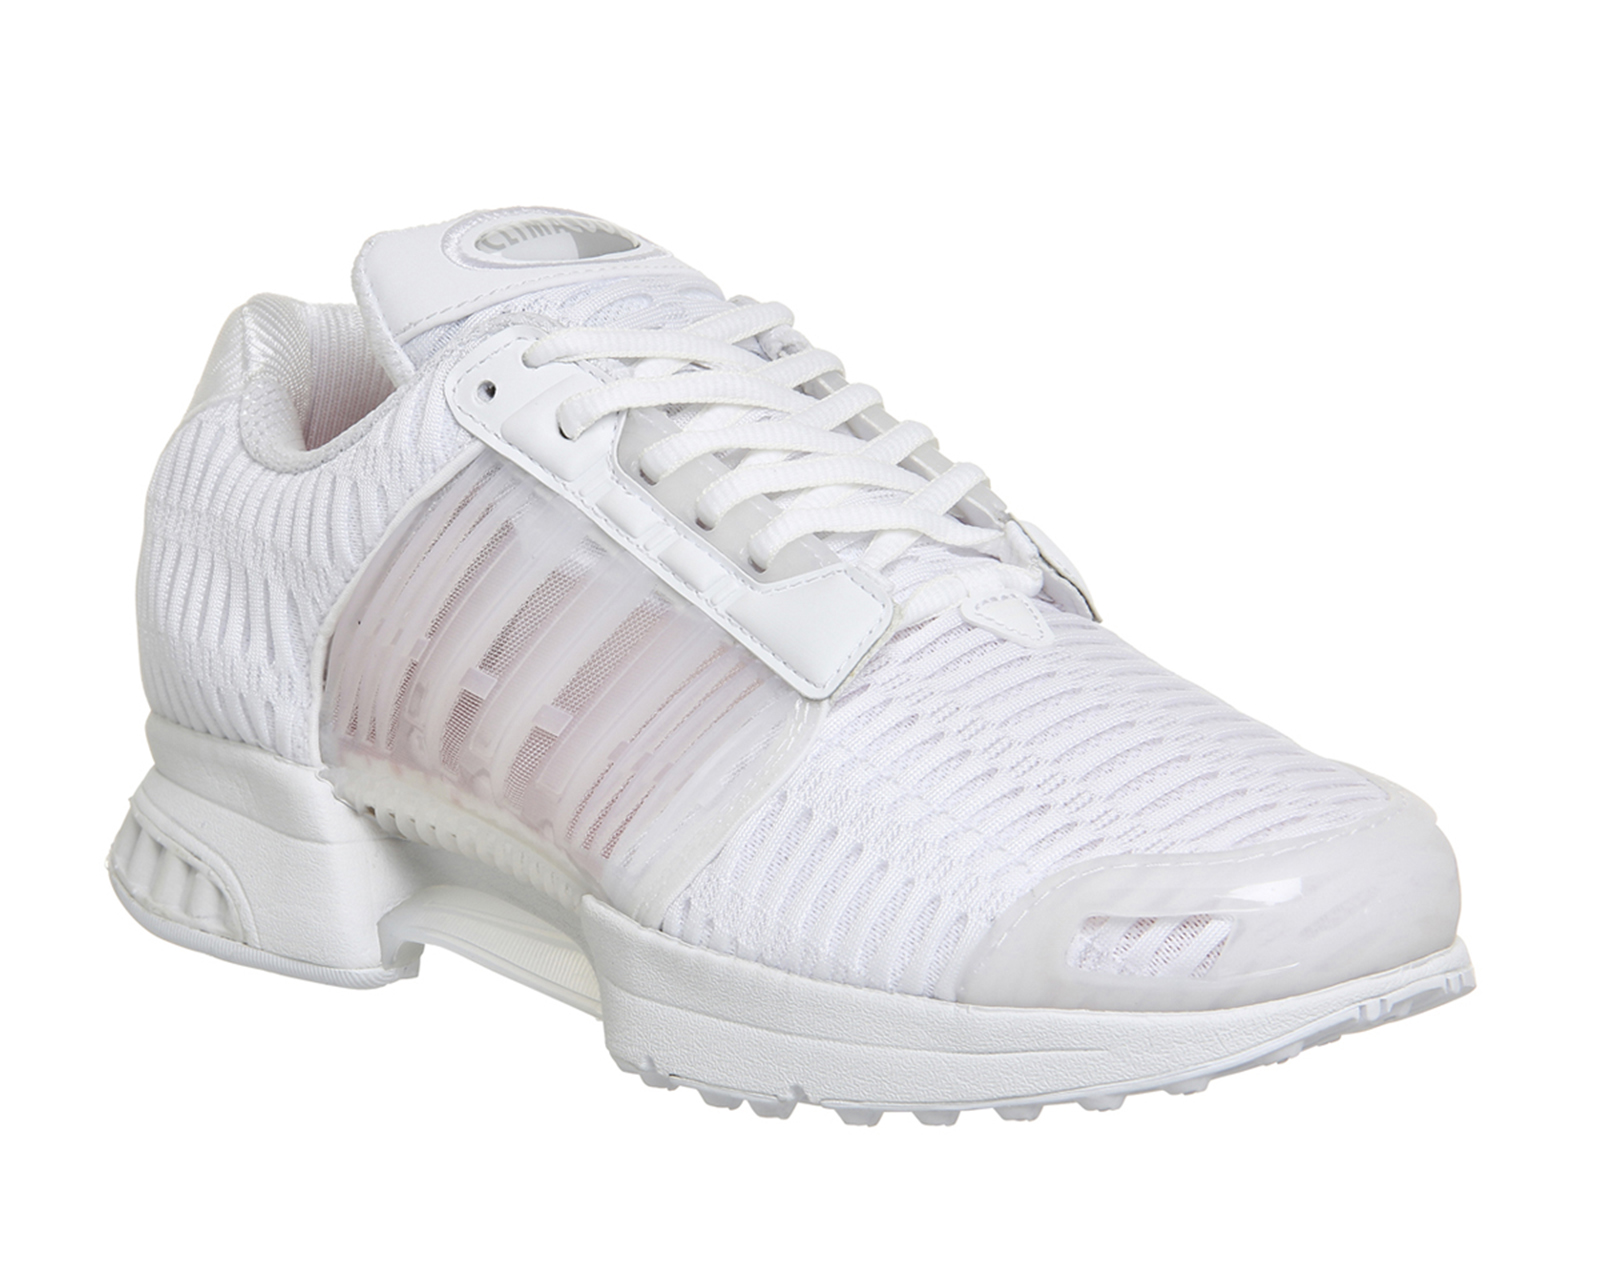 adidas Climacool 1 White - His trainers